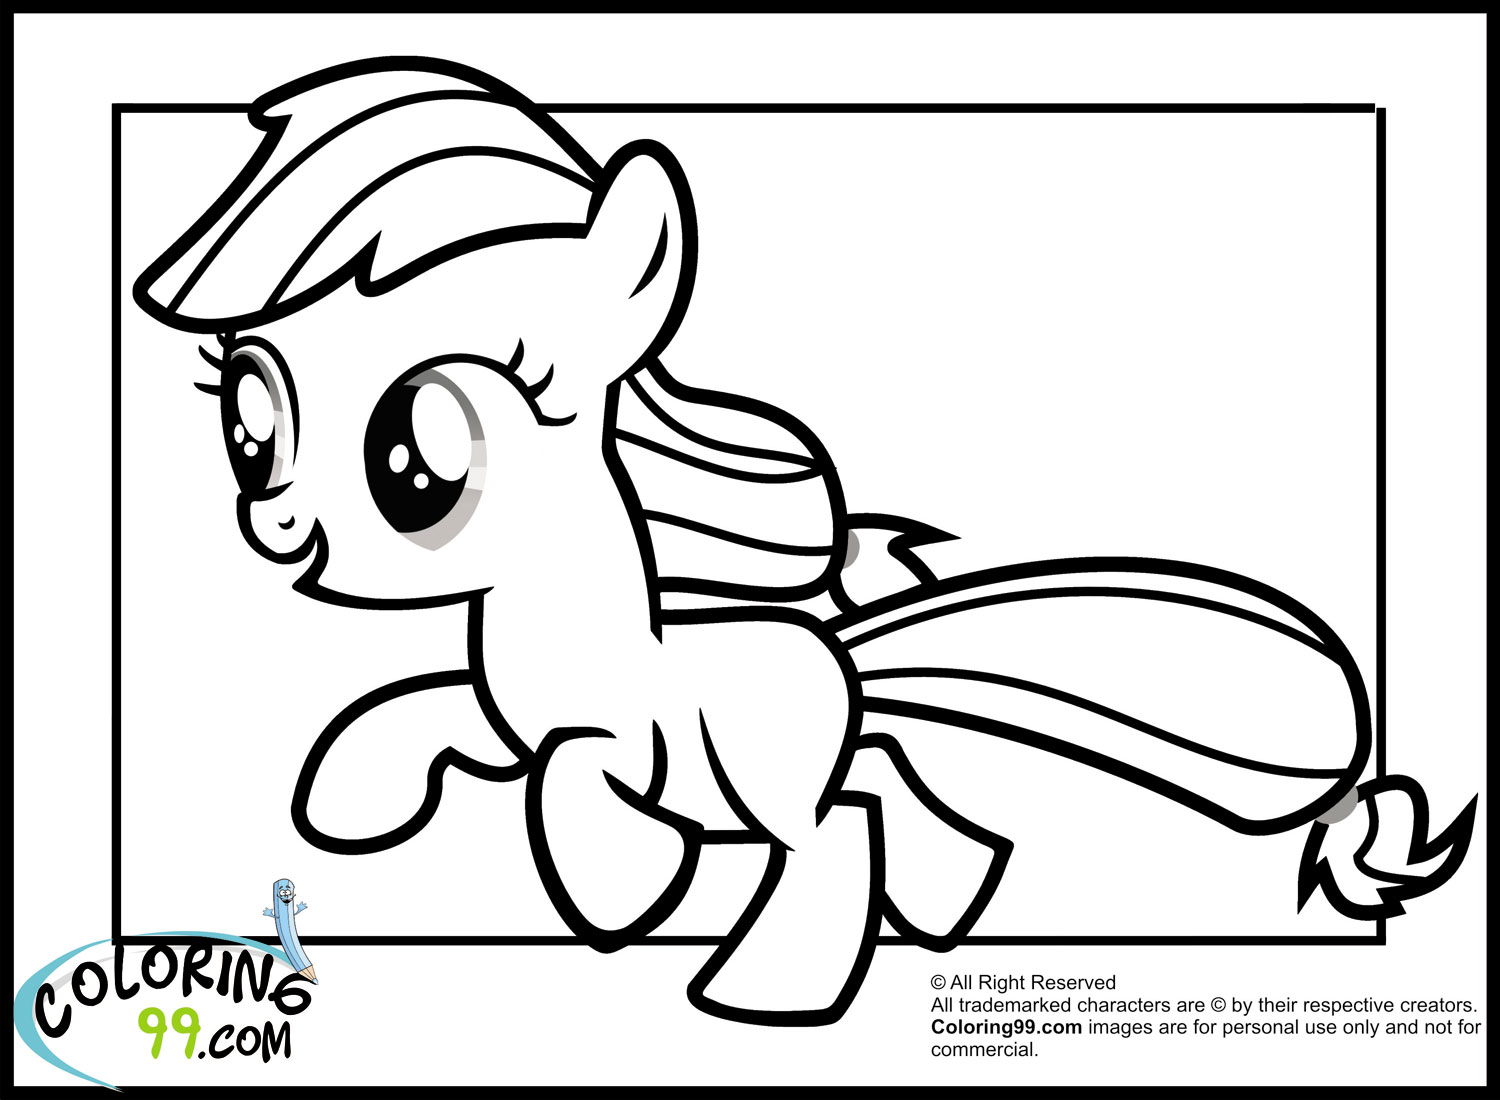 13 Pics of My Little Pony Applejack Coloring Pages Printable - My ...